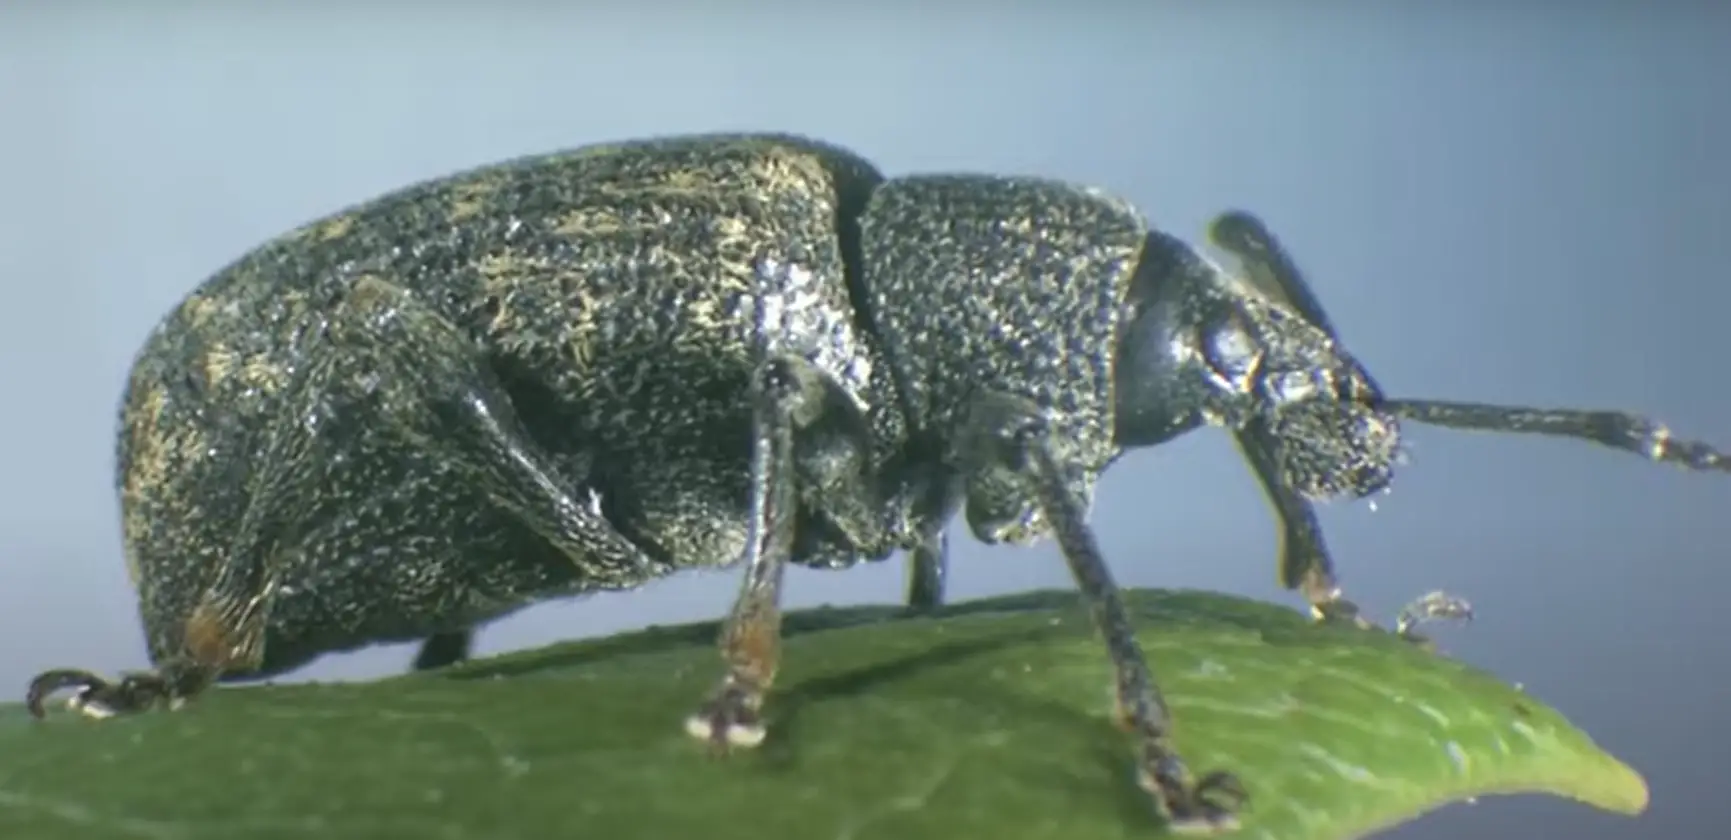 What Are Weevils?